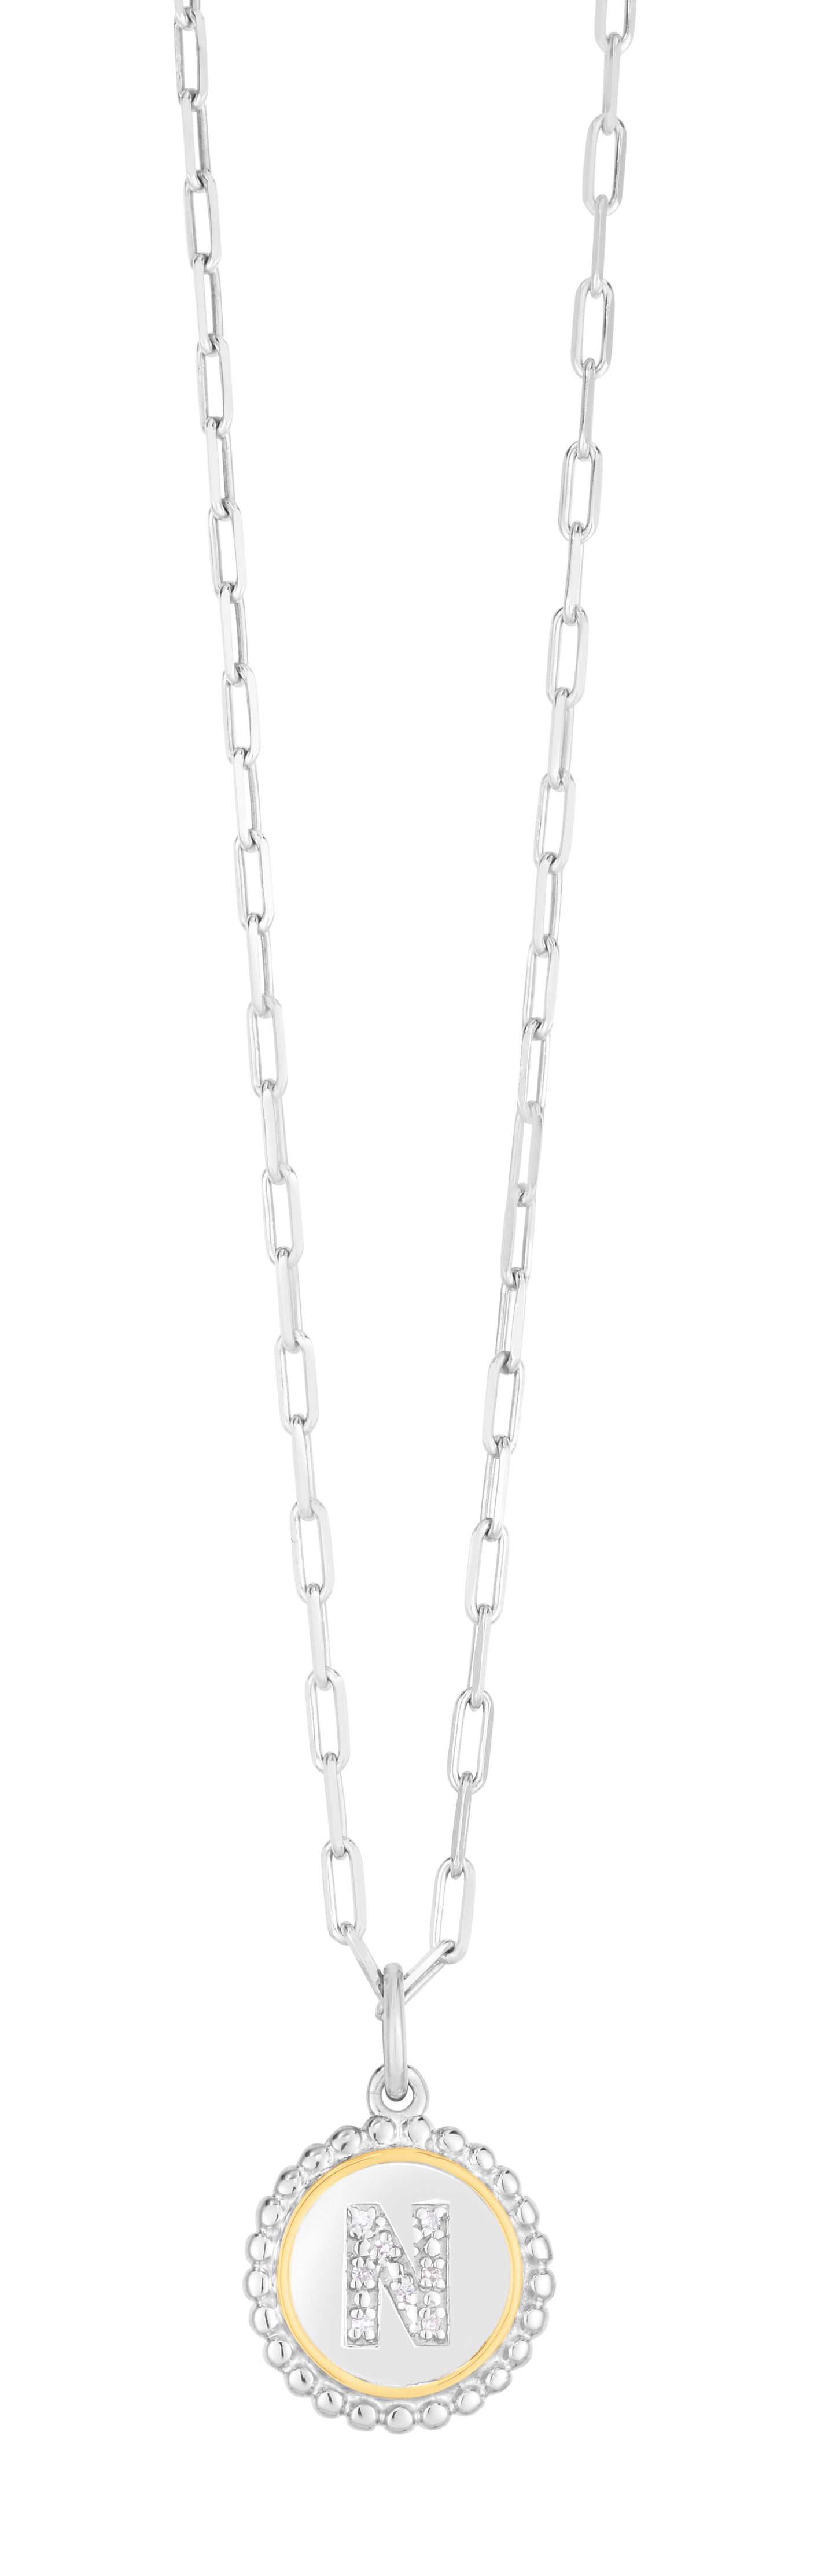 Silver-18K Popcorn Initials Letter N Necklace